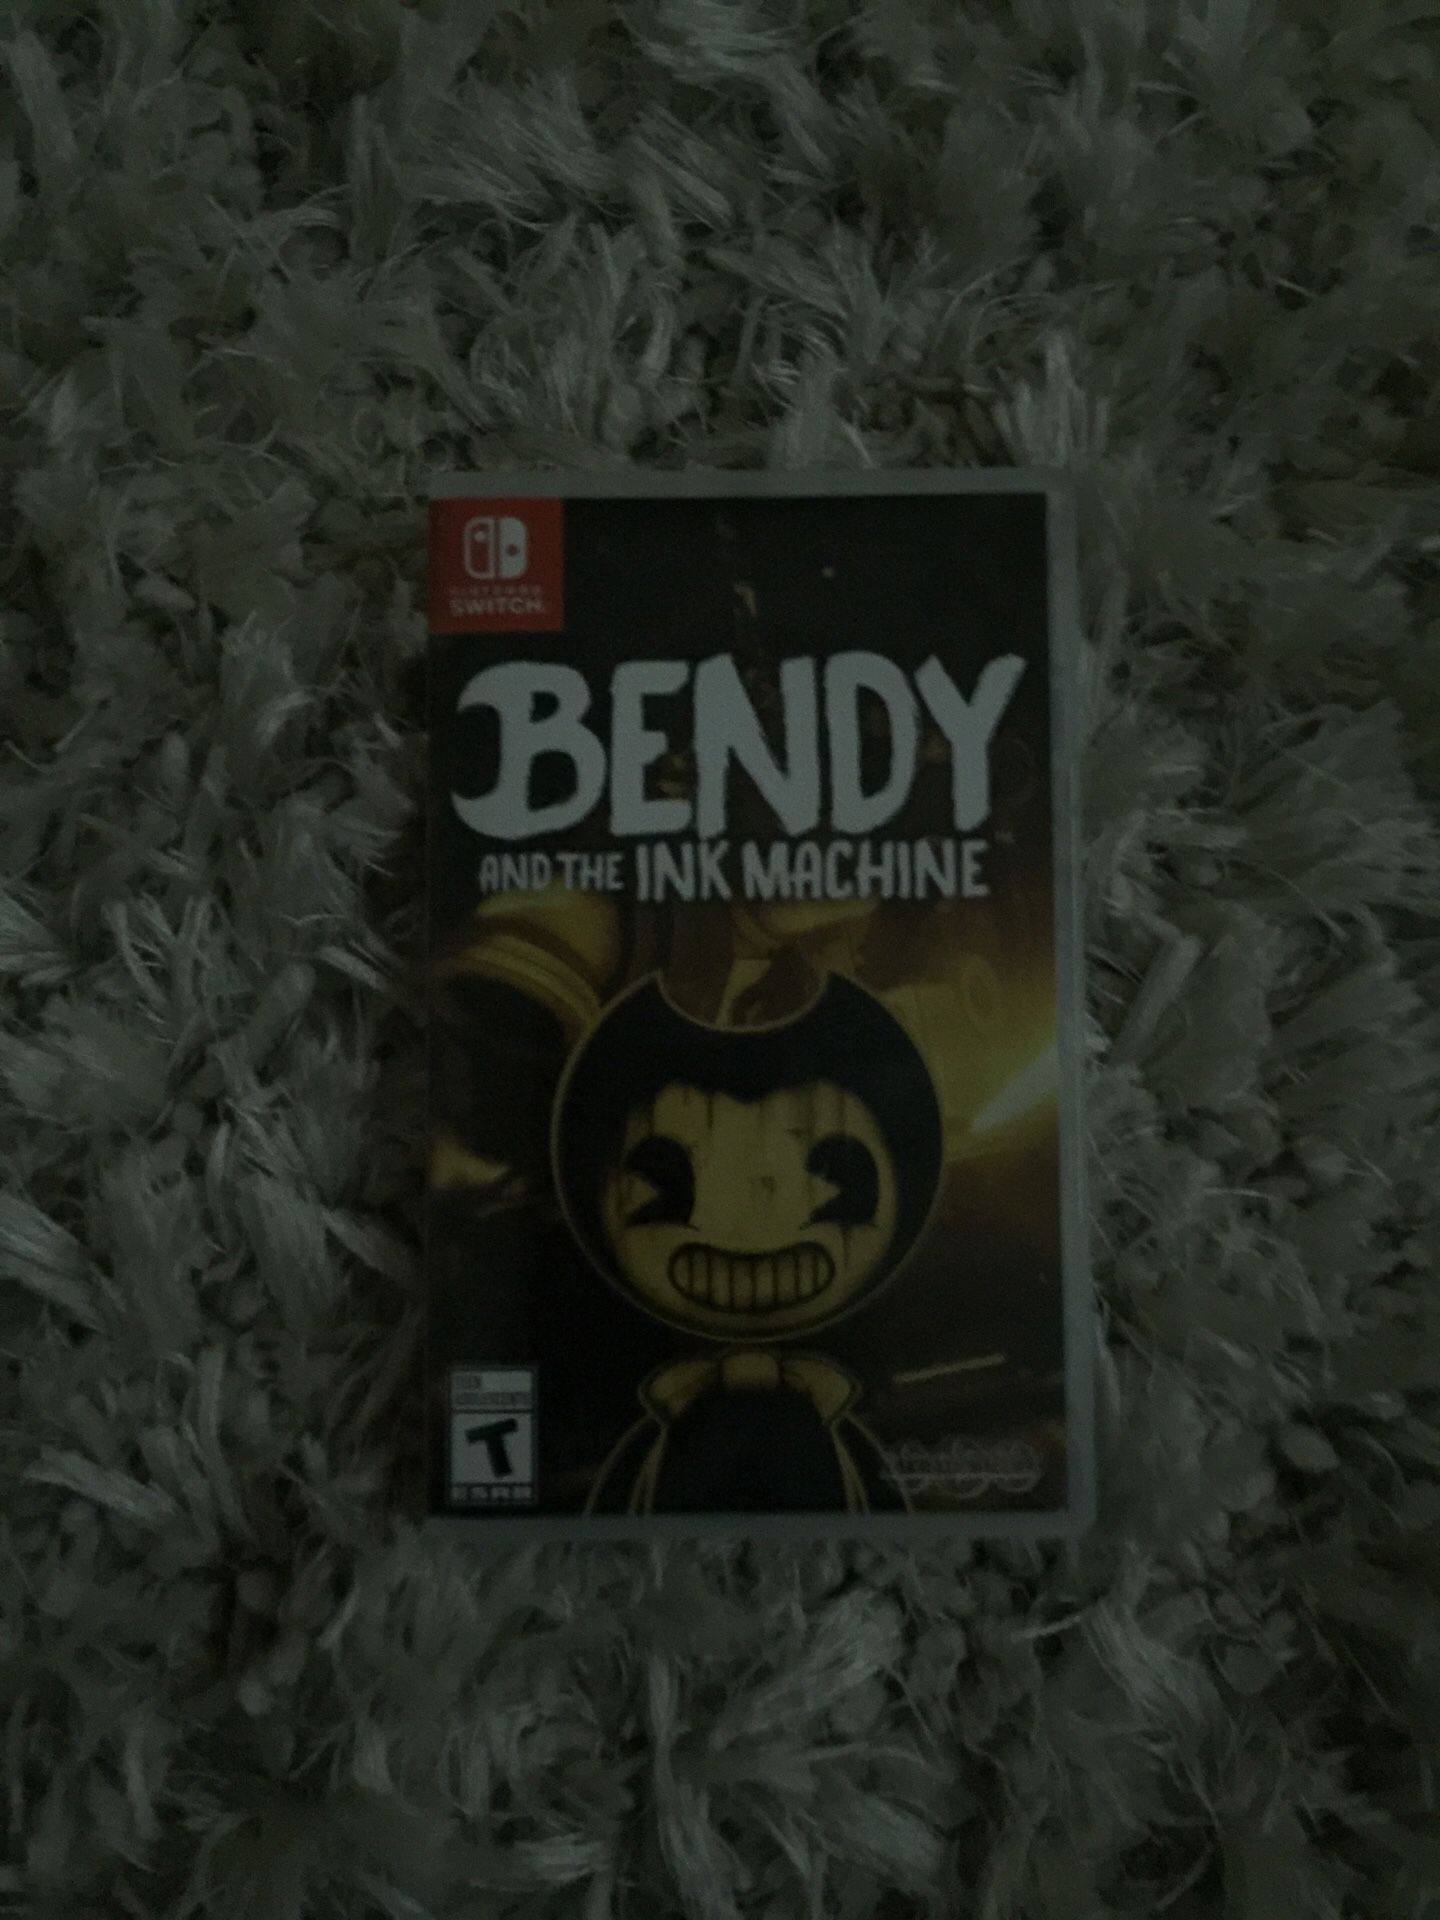 Nintendo switch Bendy and the ink machine game